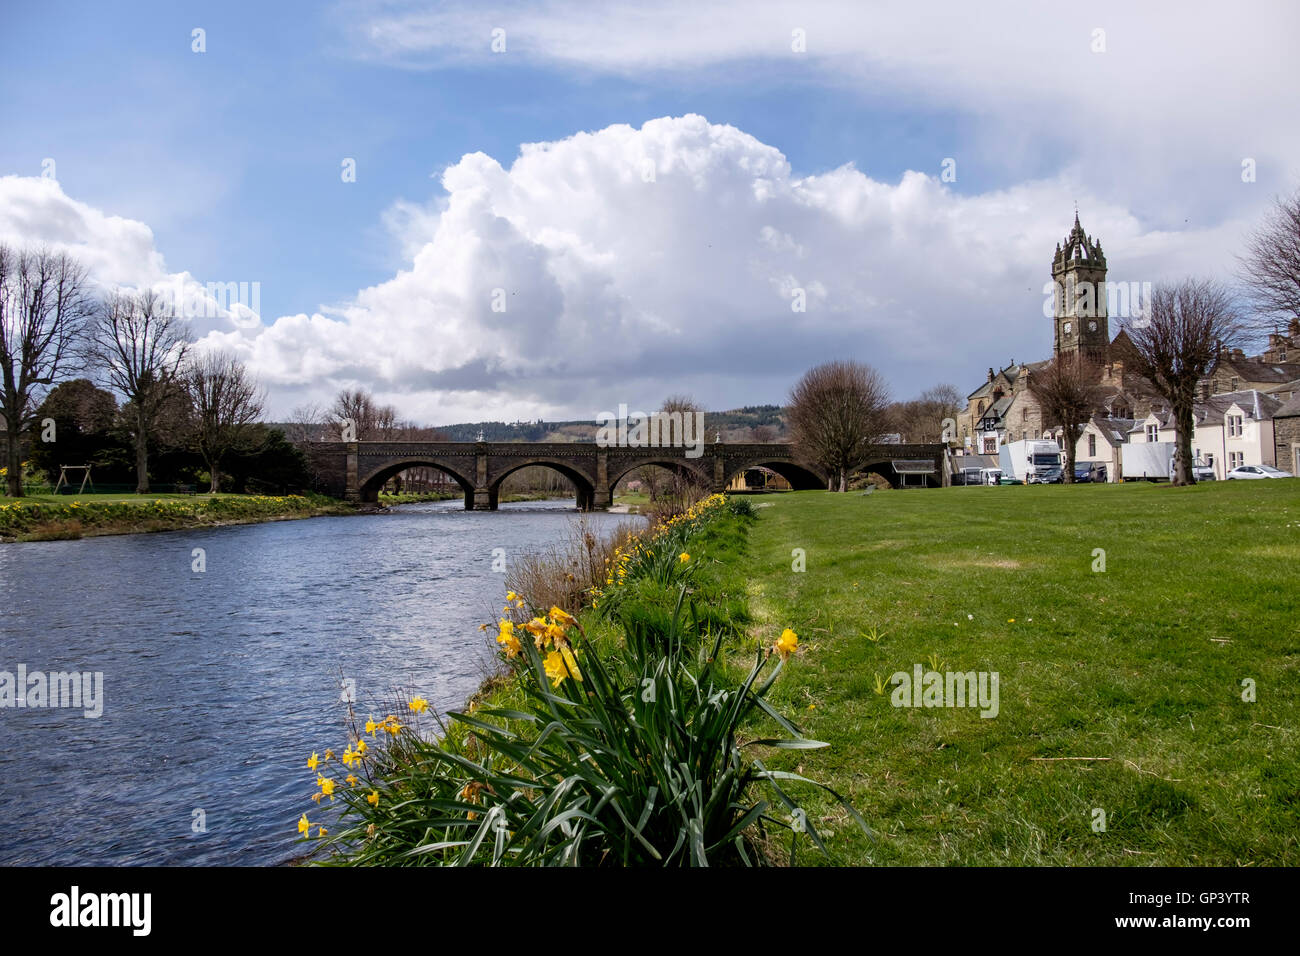 Scottish Borders town of Peebles with spring daffodils and old stone bridge over the River Tweed Stock Photo